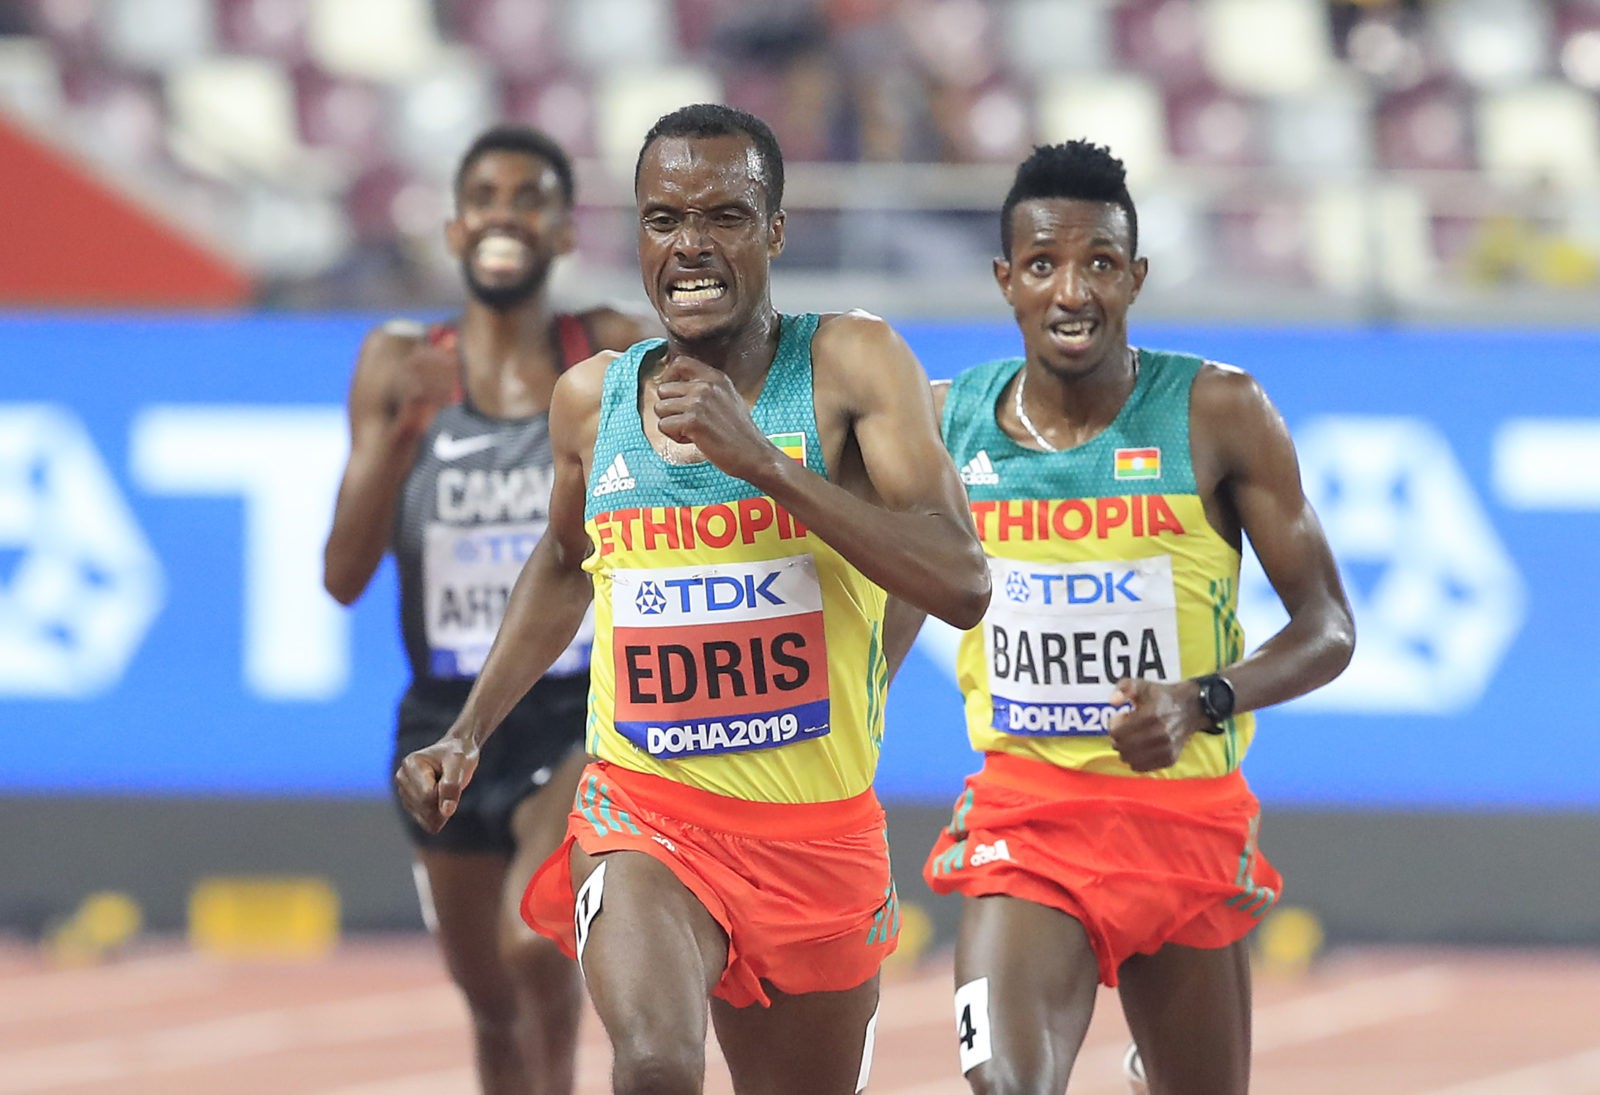 Gold medalist Muktar Edris of Ethiopia and silver medalist Selemon Barega of Ethiopia compete in the Men's 5000 metres final during day four of 17th IAAF World Athletics Championships Doha 2019 at Khalifa International Stadium on September 30, 2019 in Doha, Qatar. (Photo by Andy Lyons/Getty Images for IAAF)